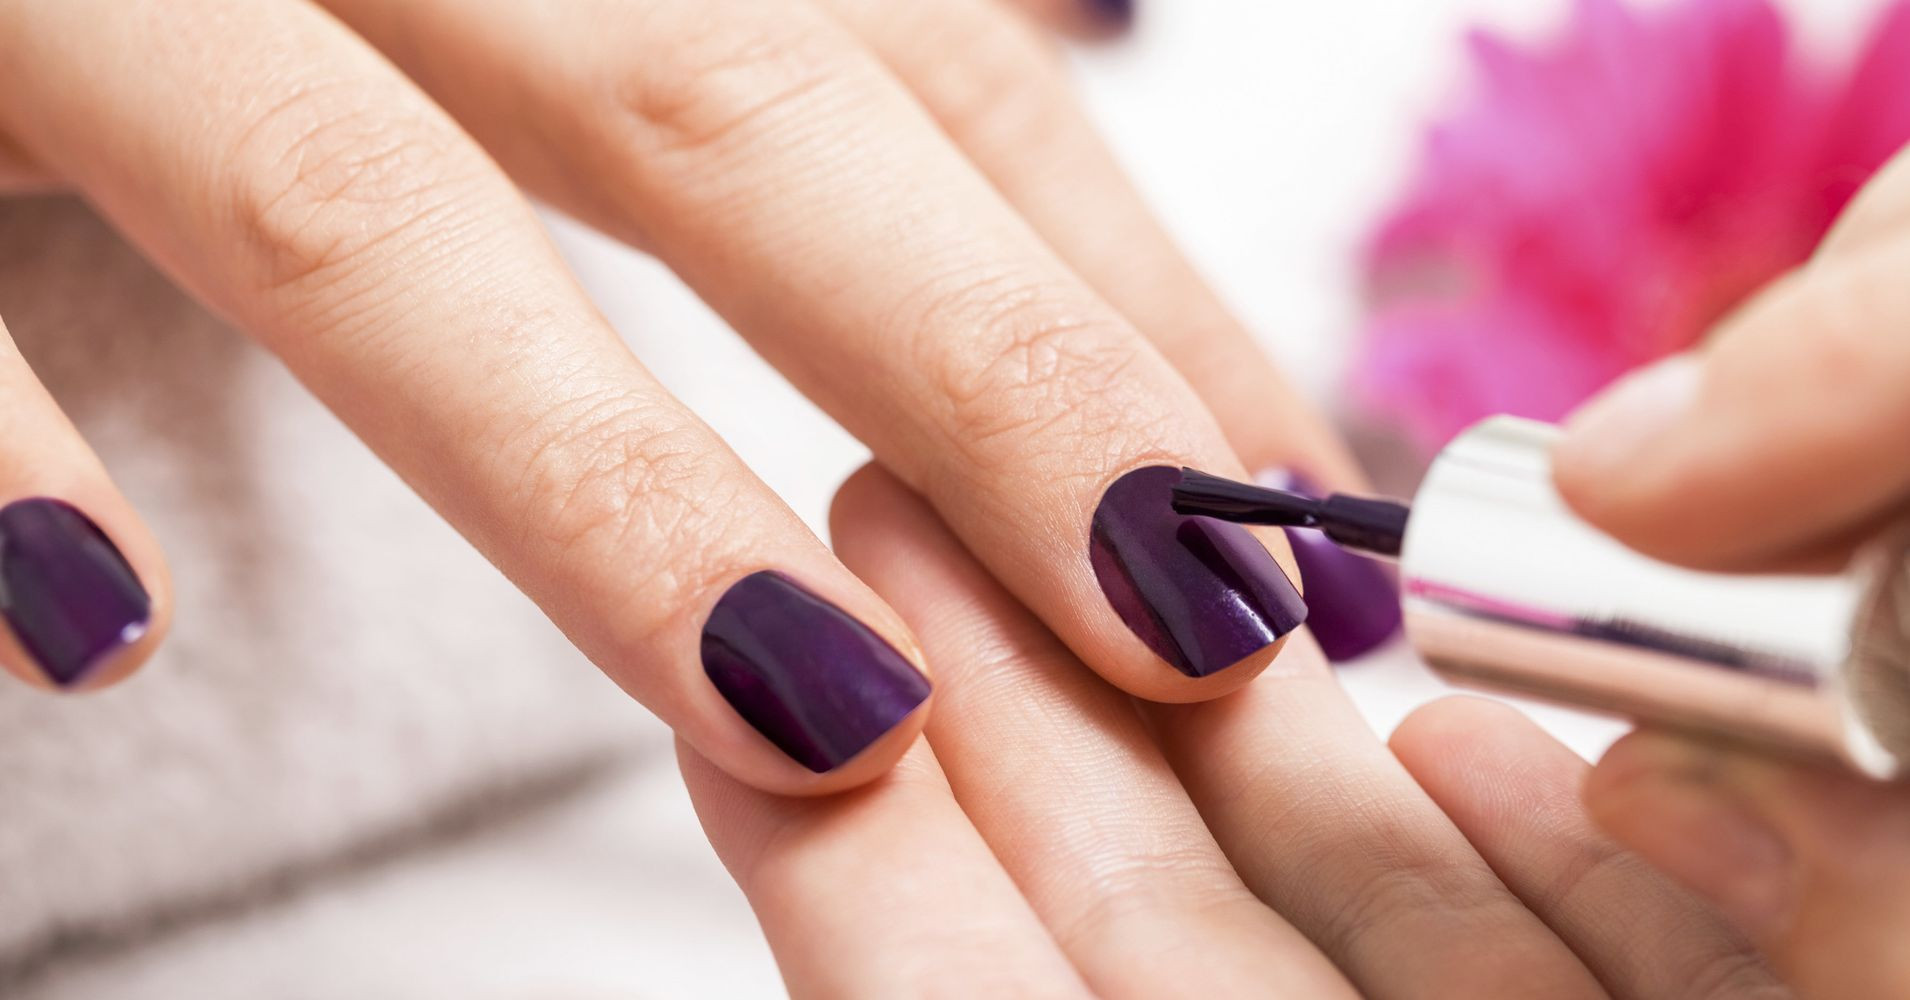 Pedicure Nail Colors
 13 Dark Nail Polish Colors To Try That Aren t Black